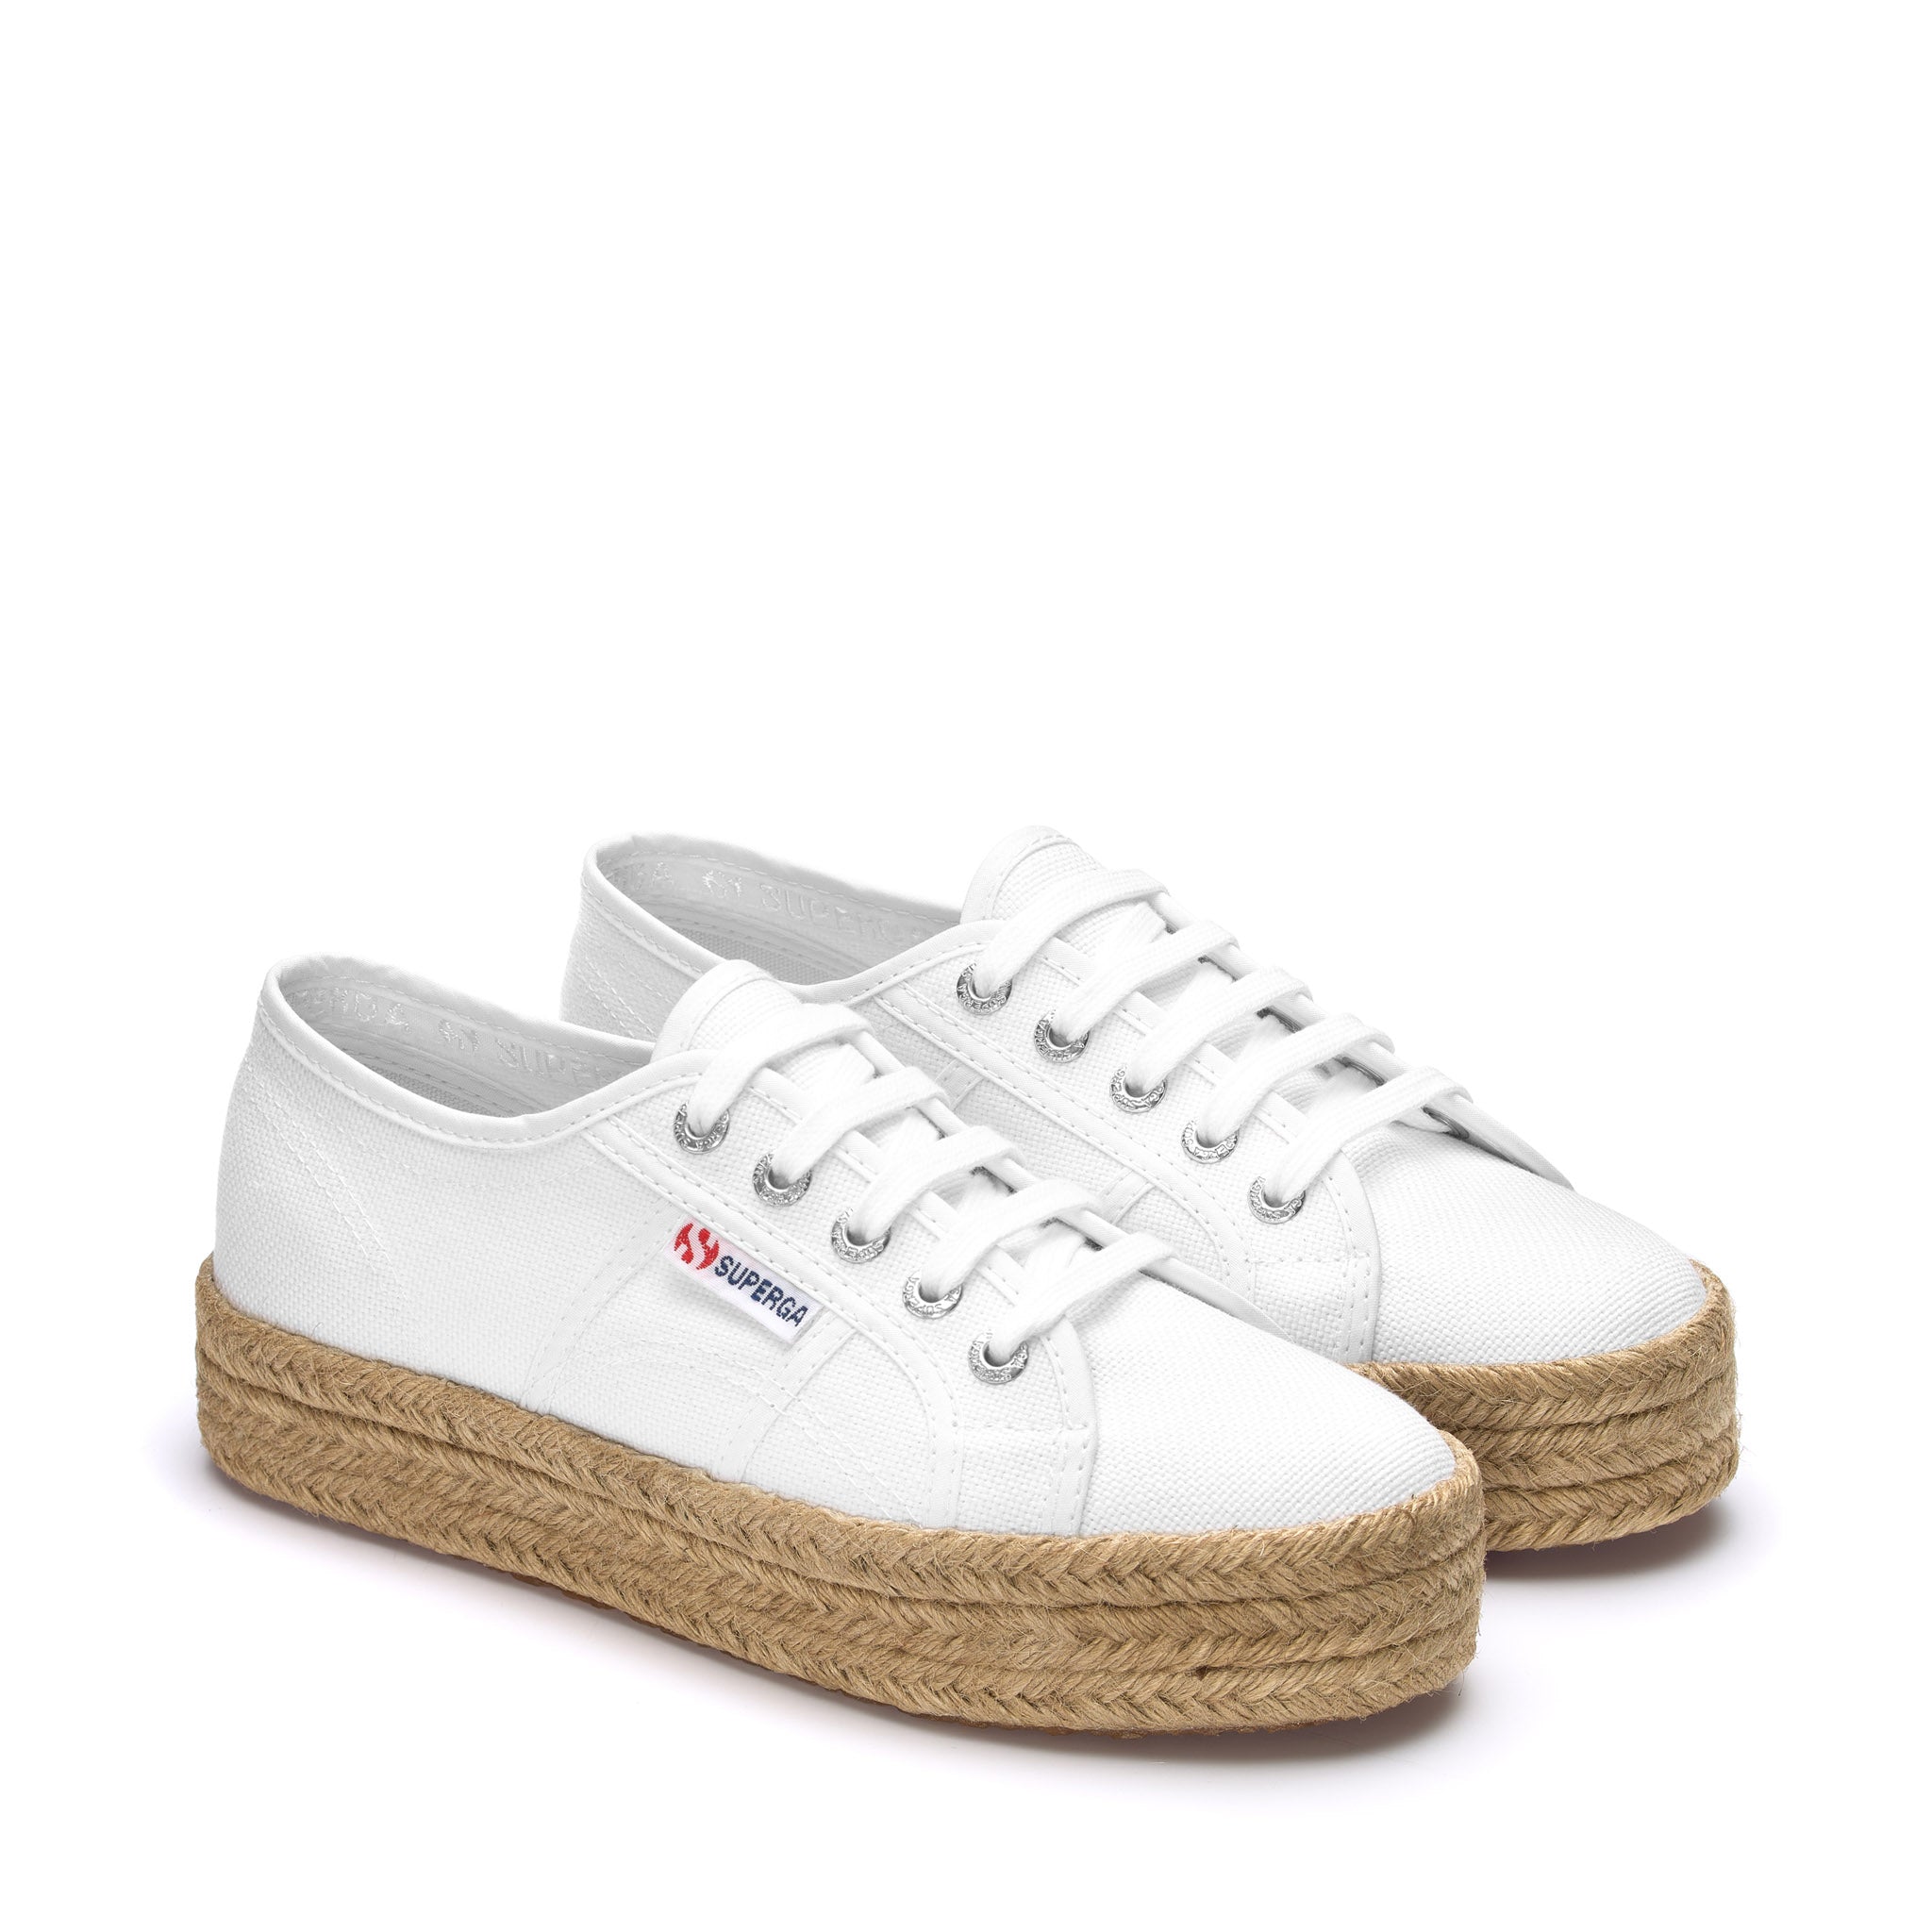 Superga 2730 Rope Sneakers - White. Front view.